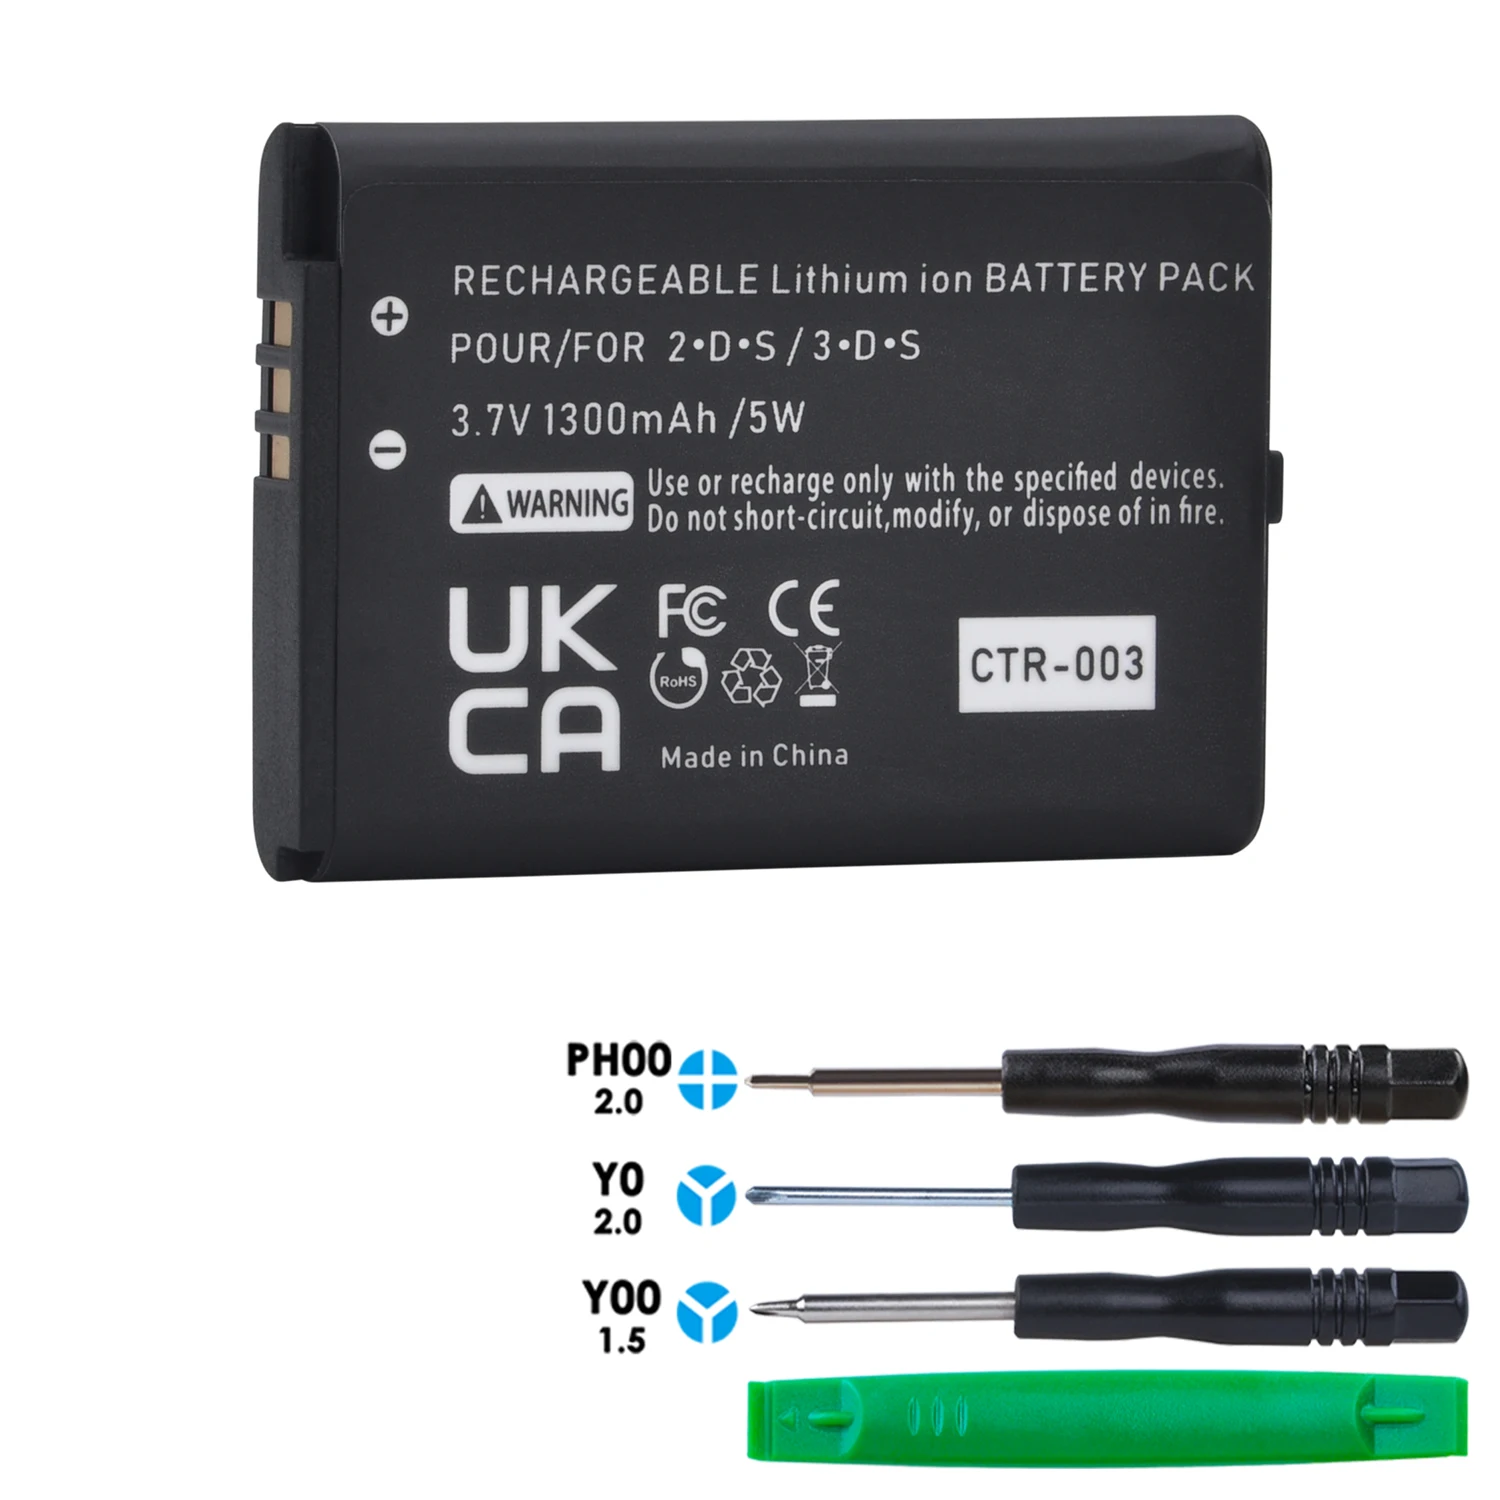 

1x 1300mAh 3.7V 5Wh CTR-003 CTR003 CTR 003 Battery Rechargeable Li-ion Bateria Pack Repair Part with tool For Nintendo 3DS /2DS